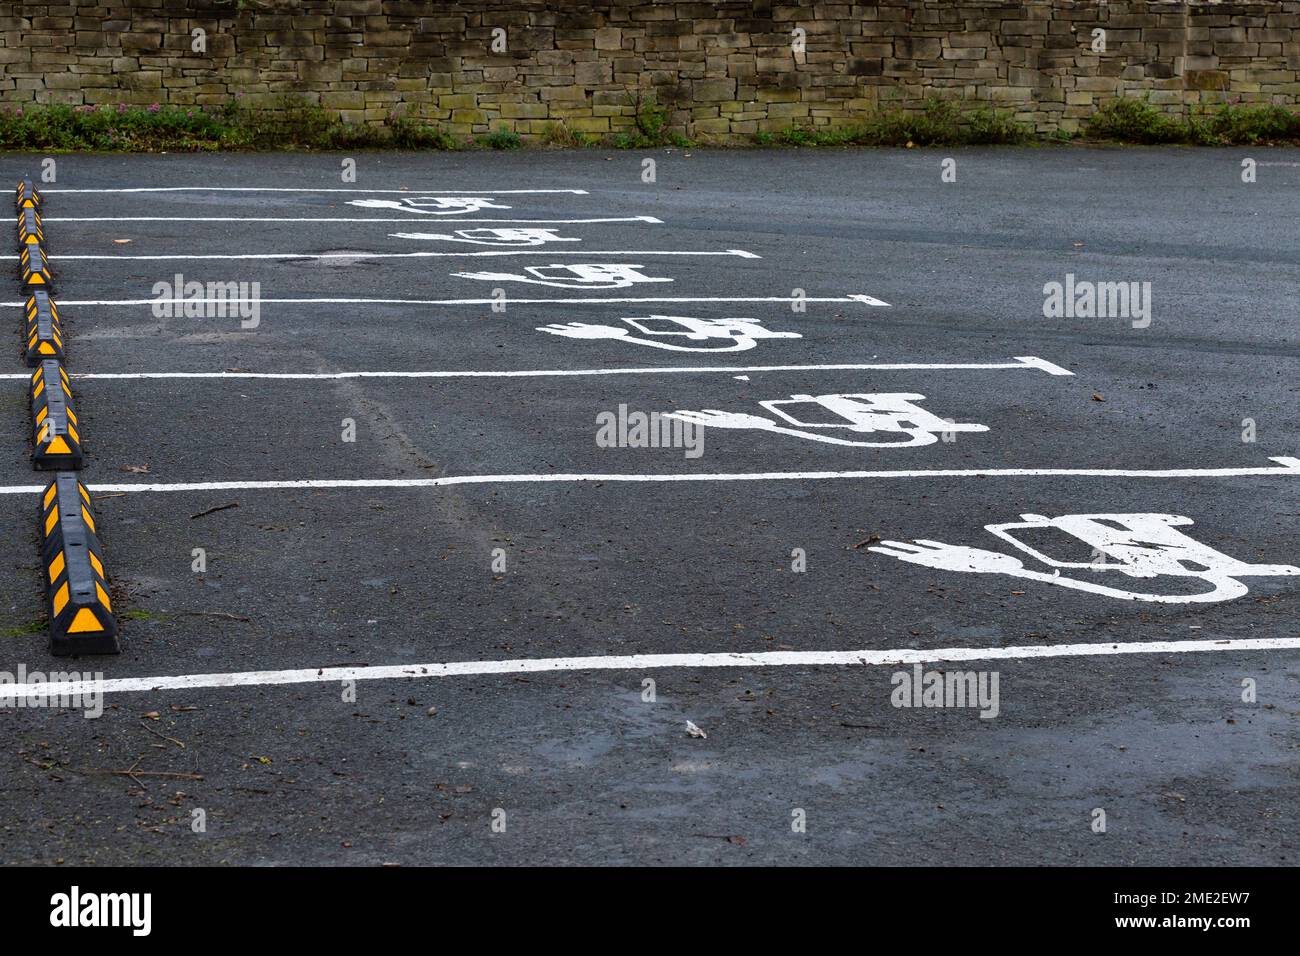 A row of car bays for electric vehicle charging. The bays show the Department of Transport official symbol for an electric car painted on the tarmac. Stock Photo